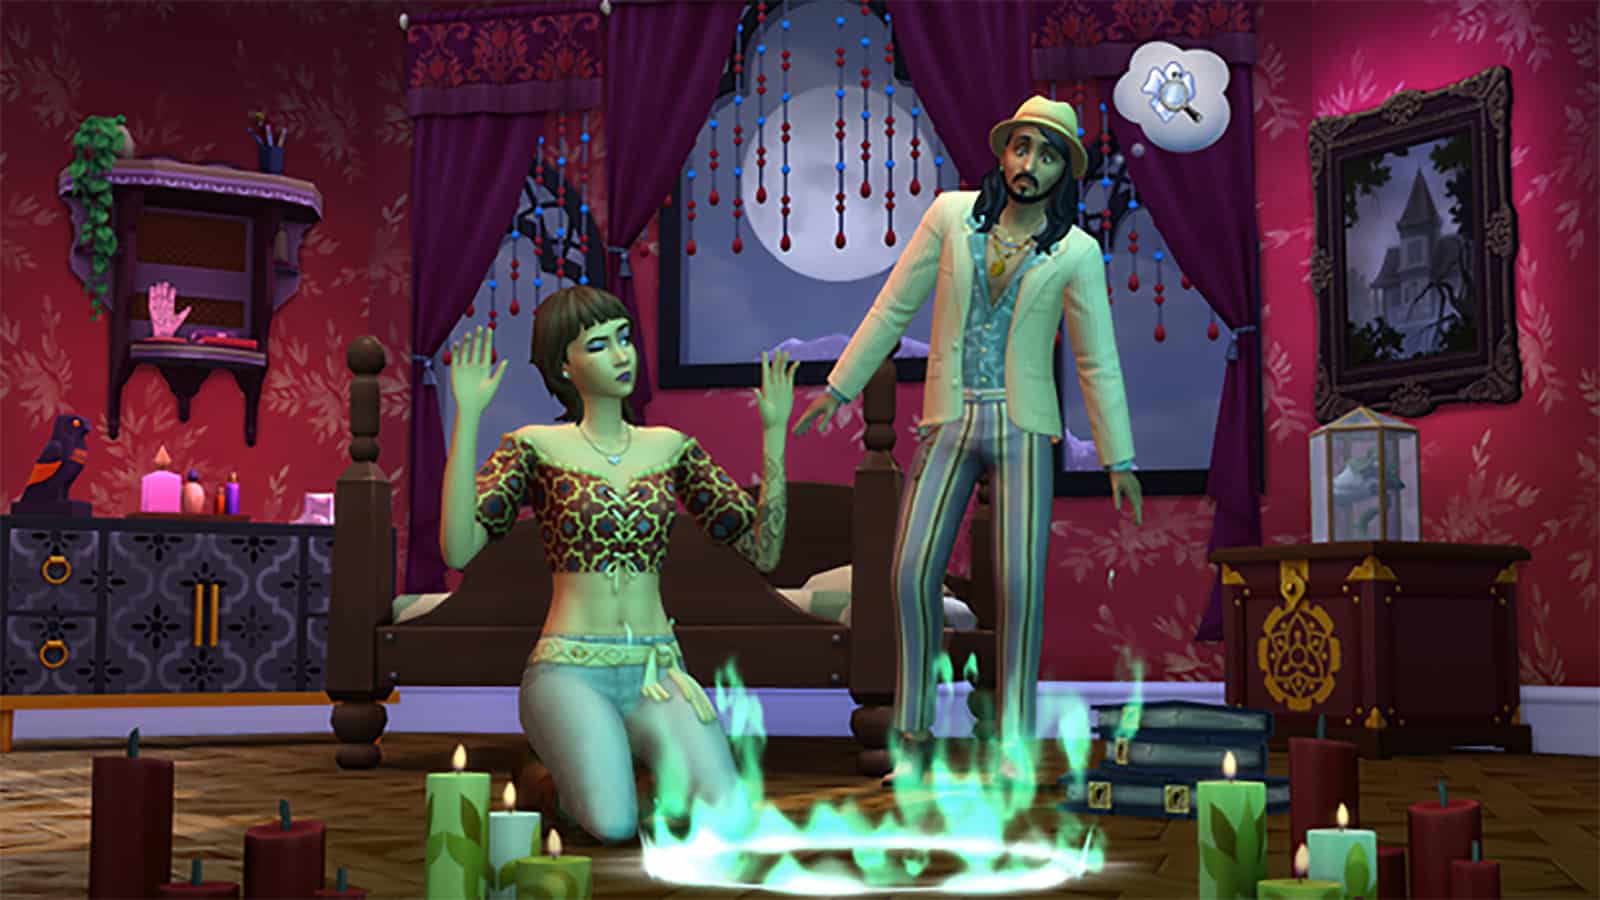 The Sims 4 Paranormal Stuff